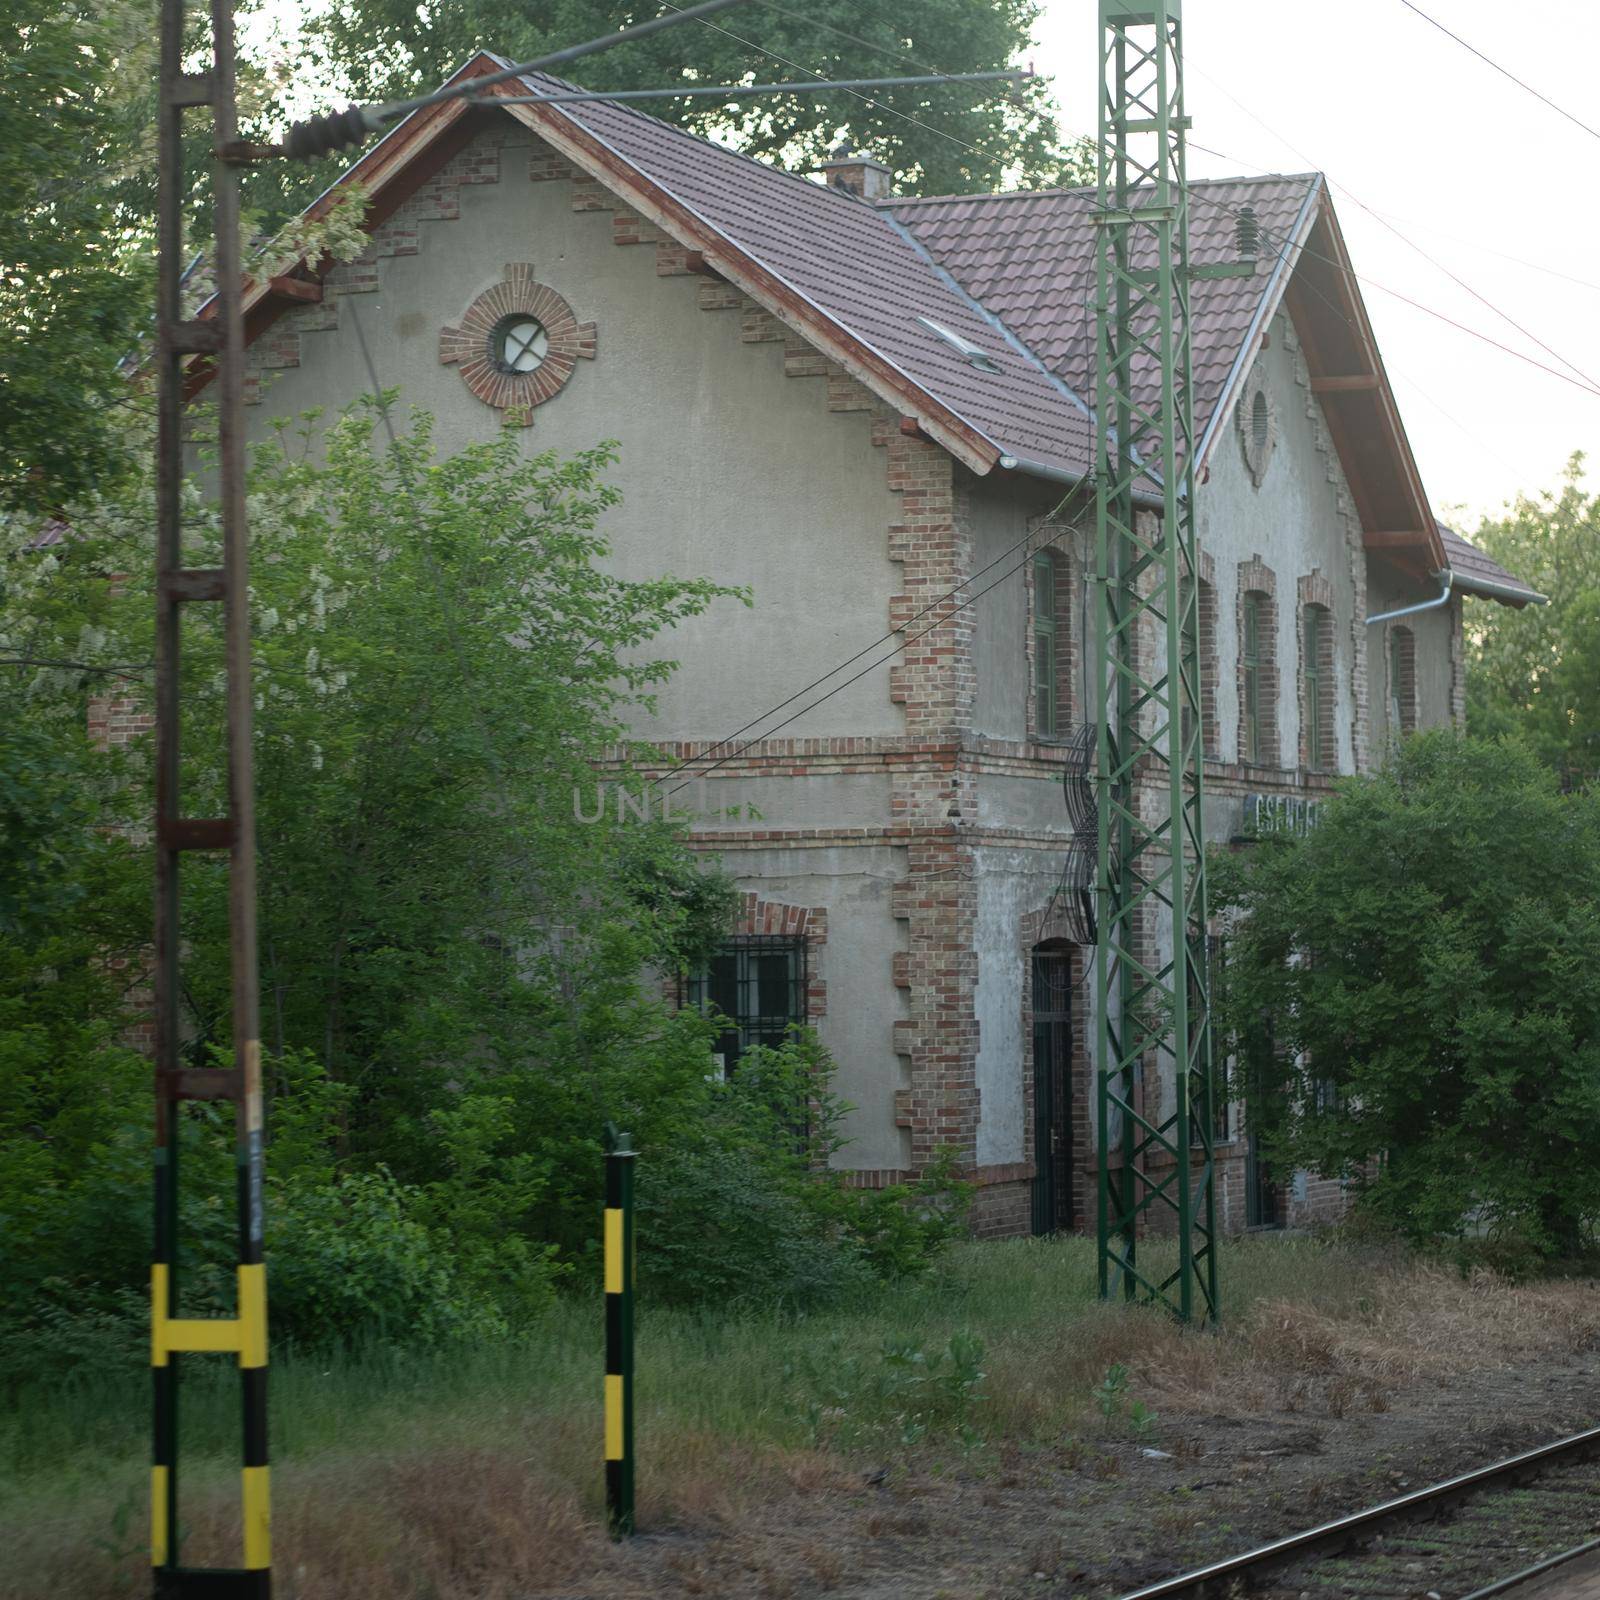 Old and scary railway station building with brick walls